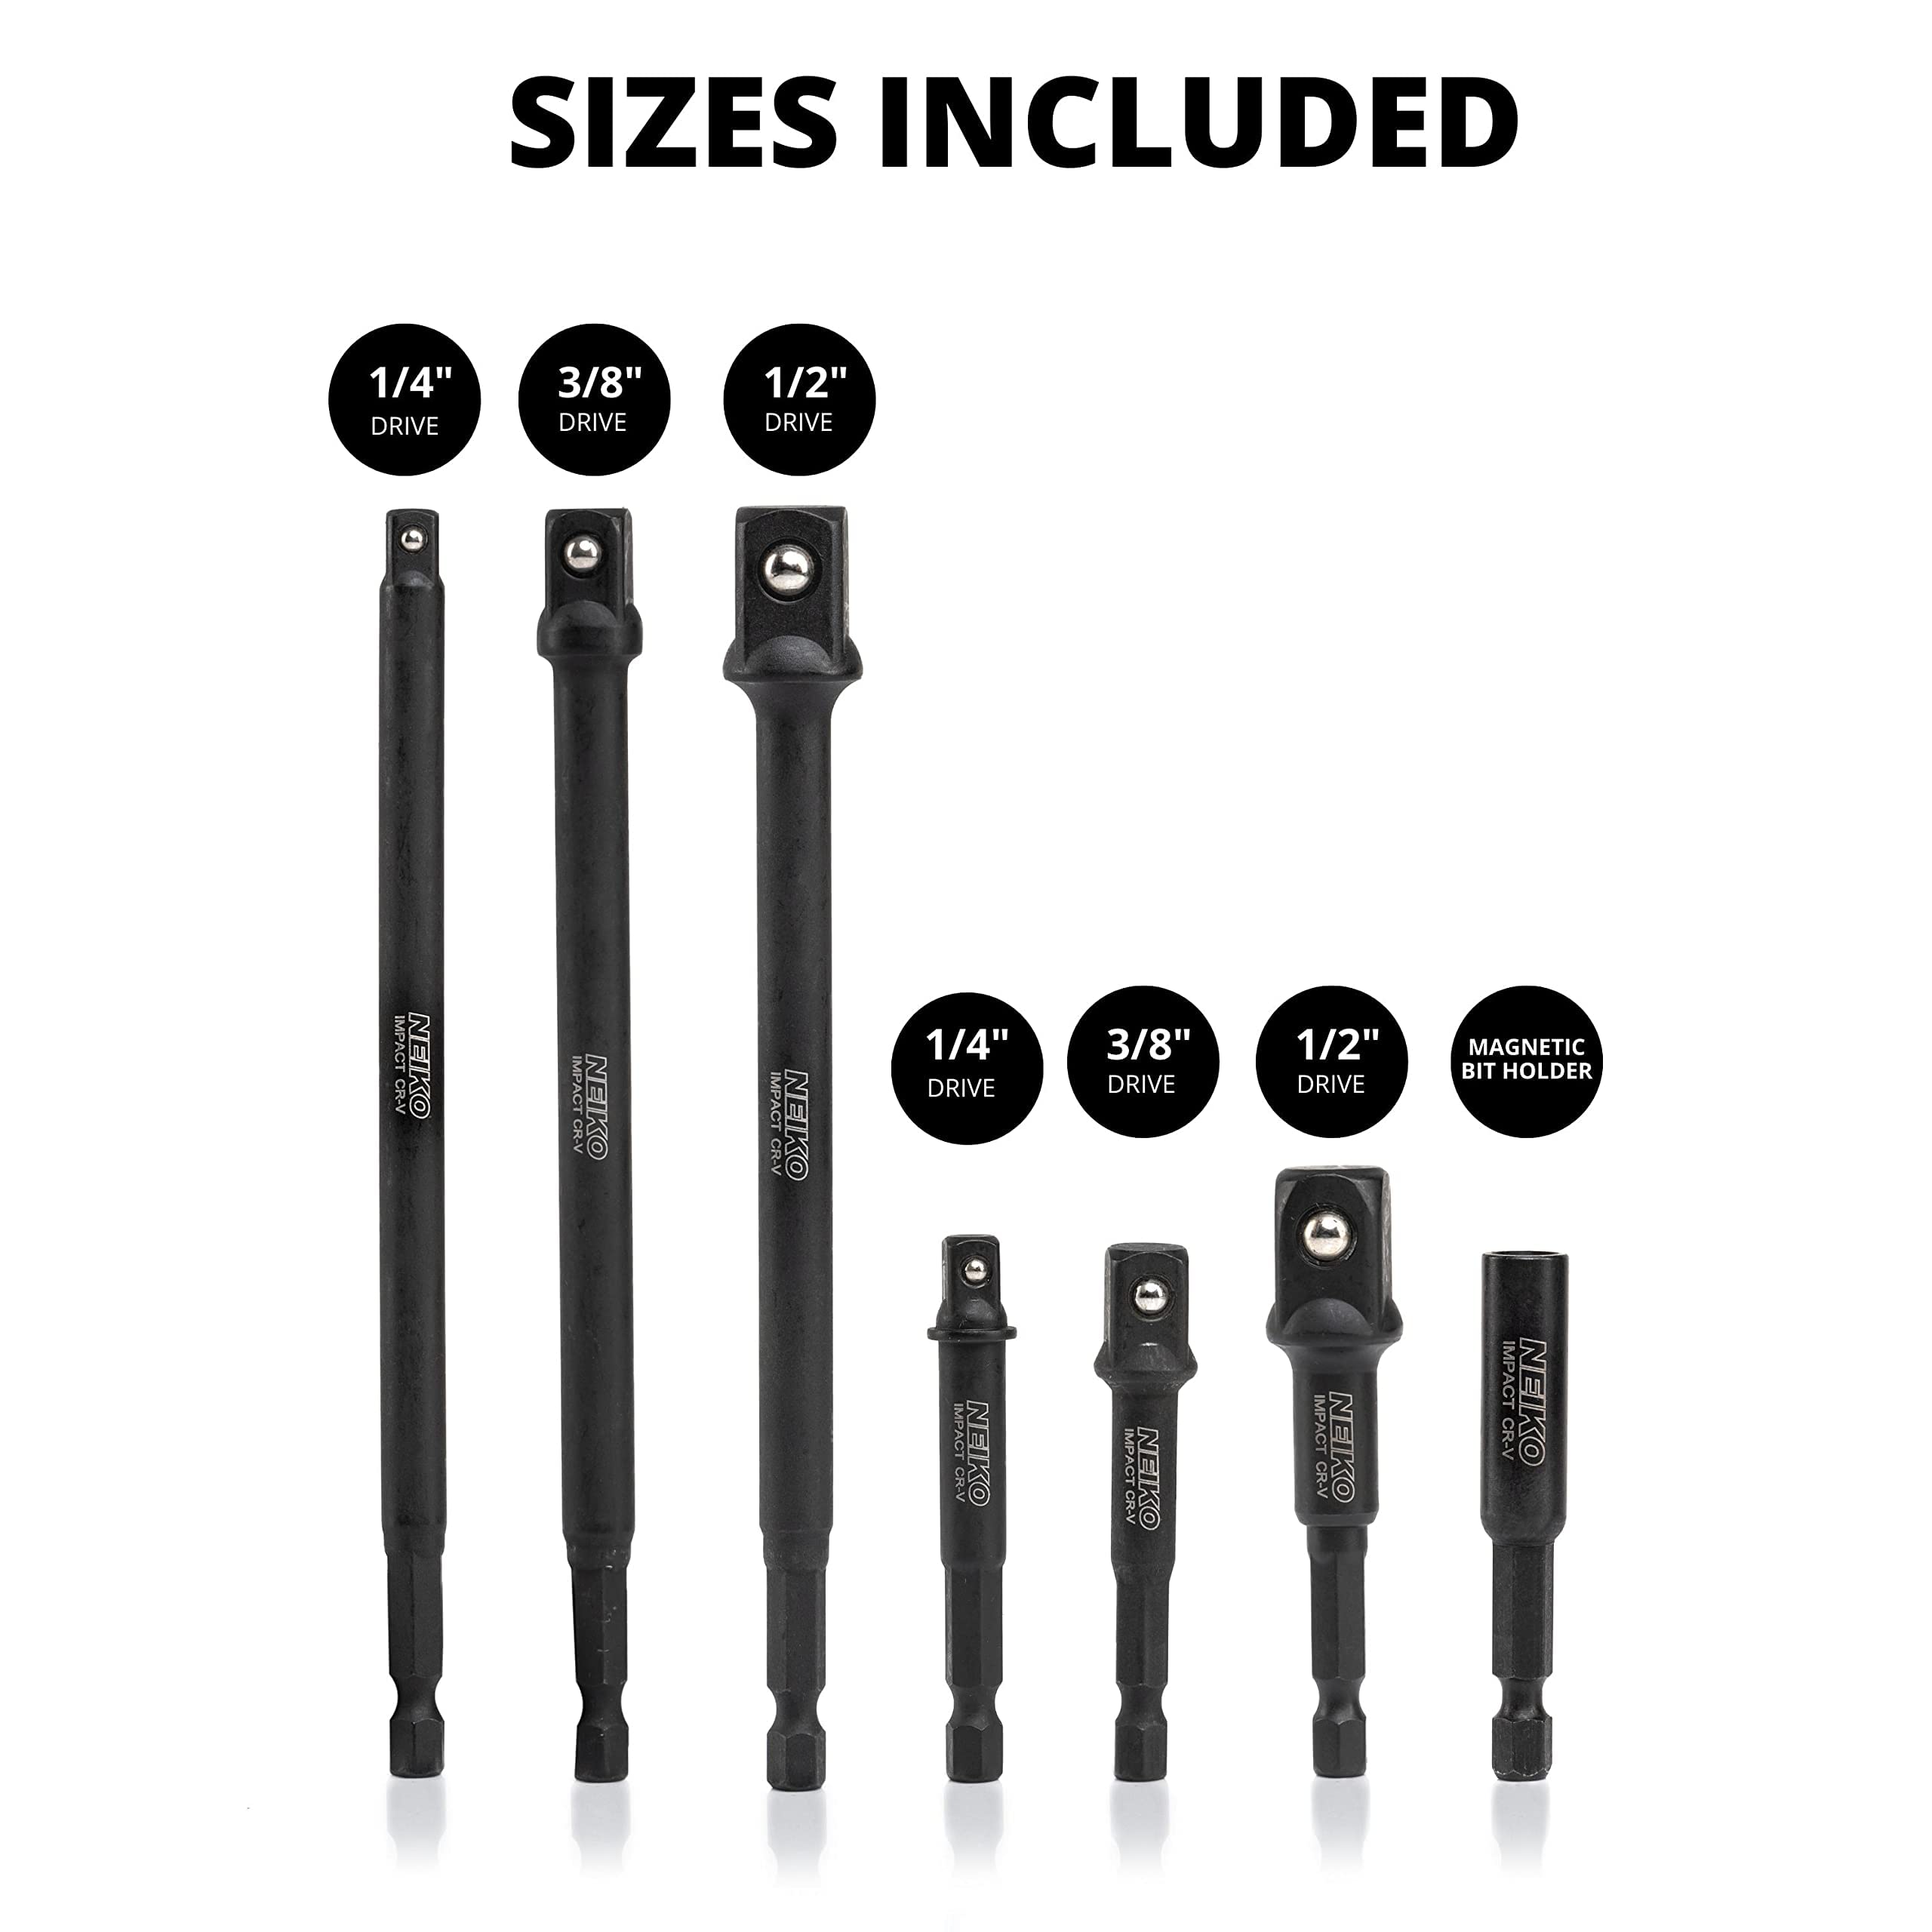 NEIKO 00254A Impact Socket Adapter and Magnetic Bit Holder, 7-Piece Set, 1/4" Hex Shank with 1/4, 3/8, 1/2-Inch Drive, Socket Adapter Extension Set 6" Long, Cr-V Steel, Power Drills & Impact Drivers